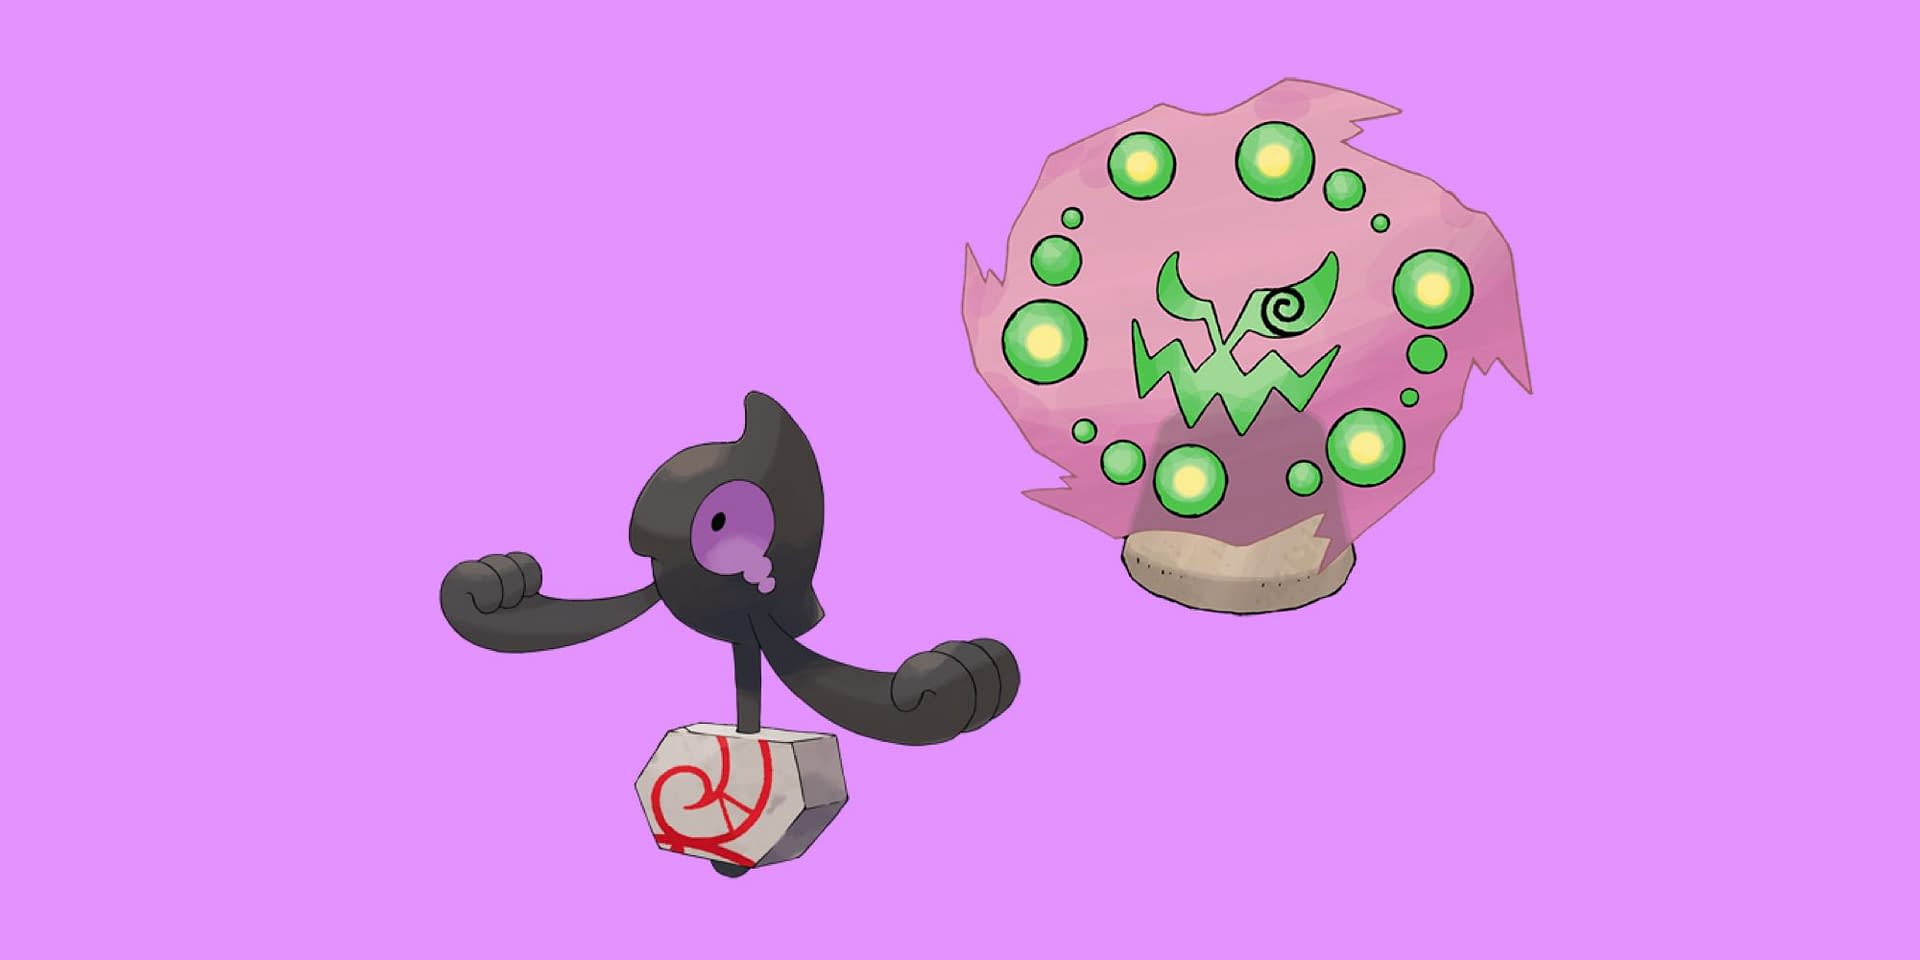 Pokemon Sword and Shield datamine finds additional Pokemon beyond